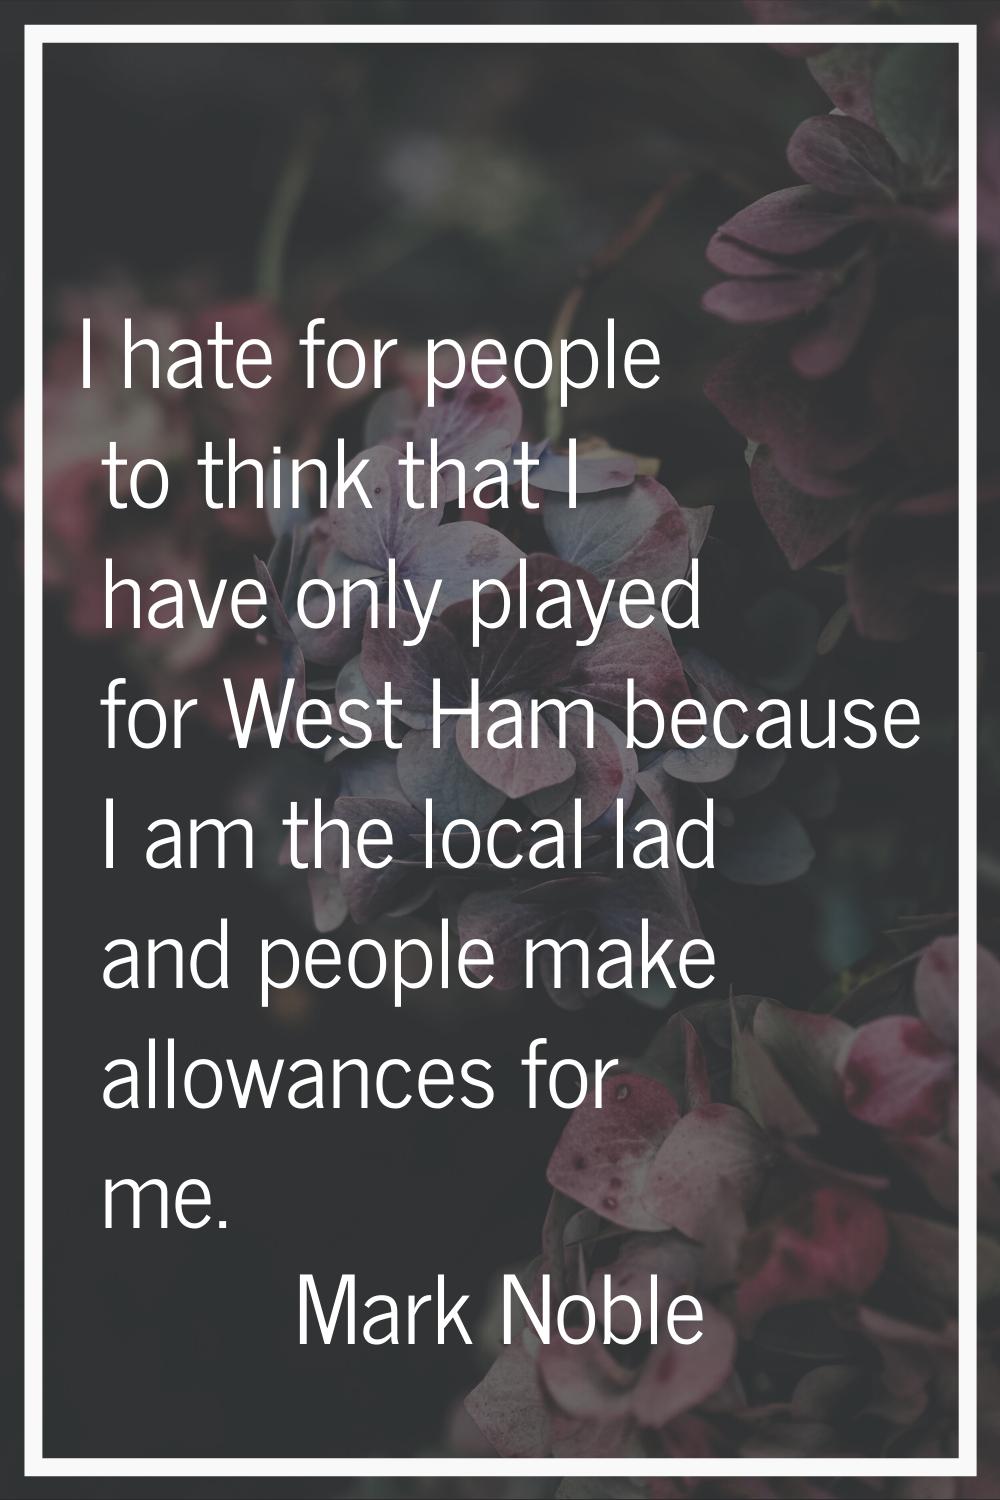 I hate for people to think that I have only played for West Ham because I am the local lad and peop